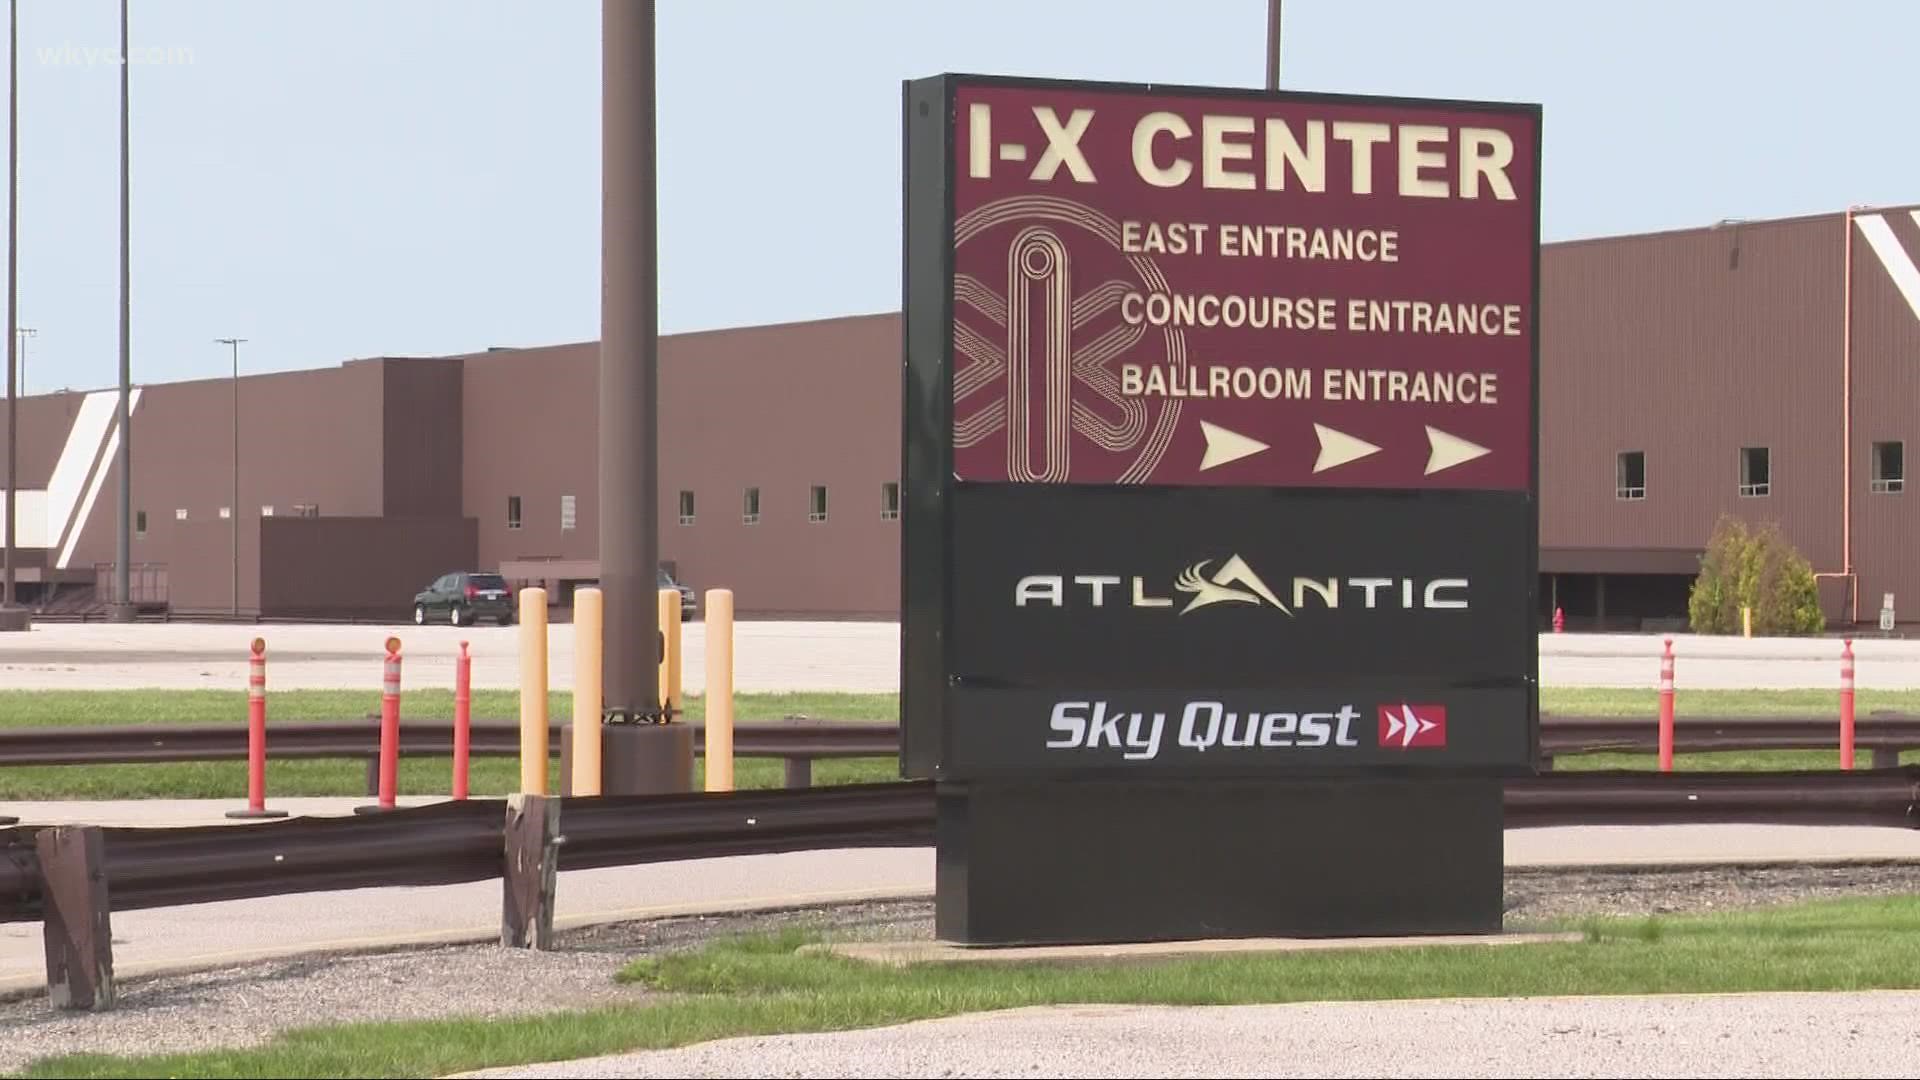 The I-X Center is making a comeback. Industrial Realty Group says their company purchased the I-X Center Corporation stock and is planning to reopen it for events.